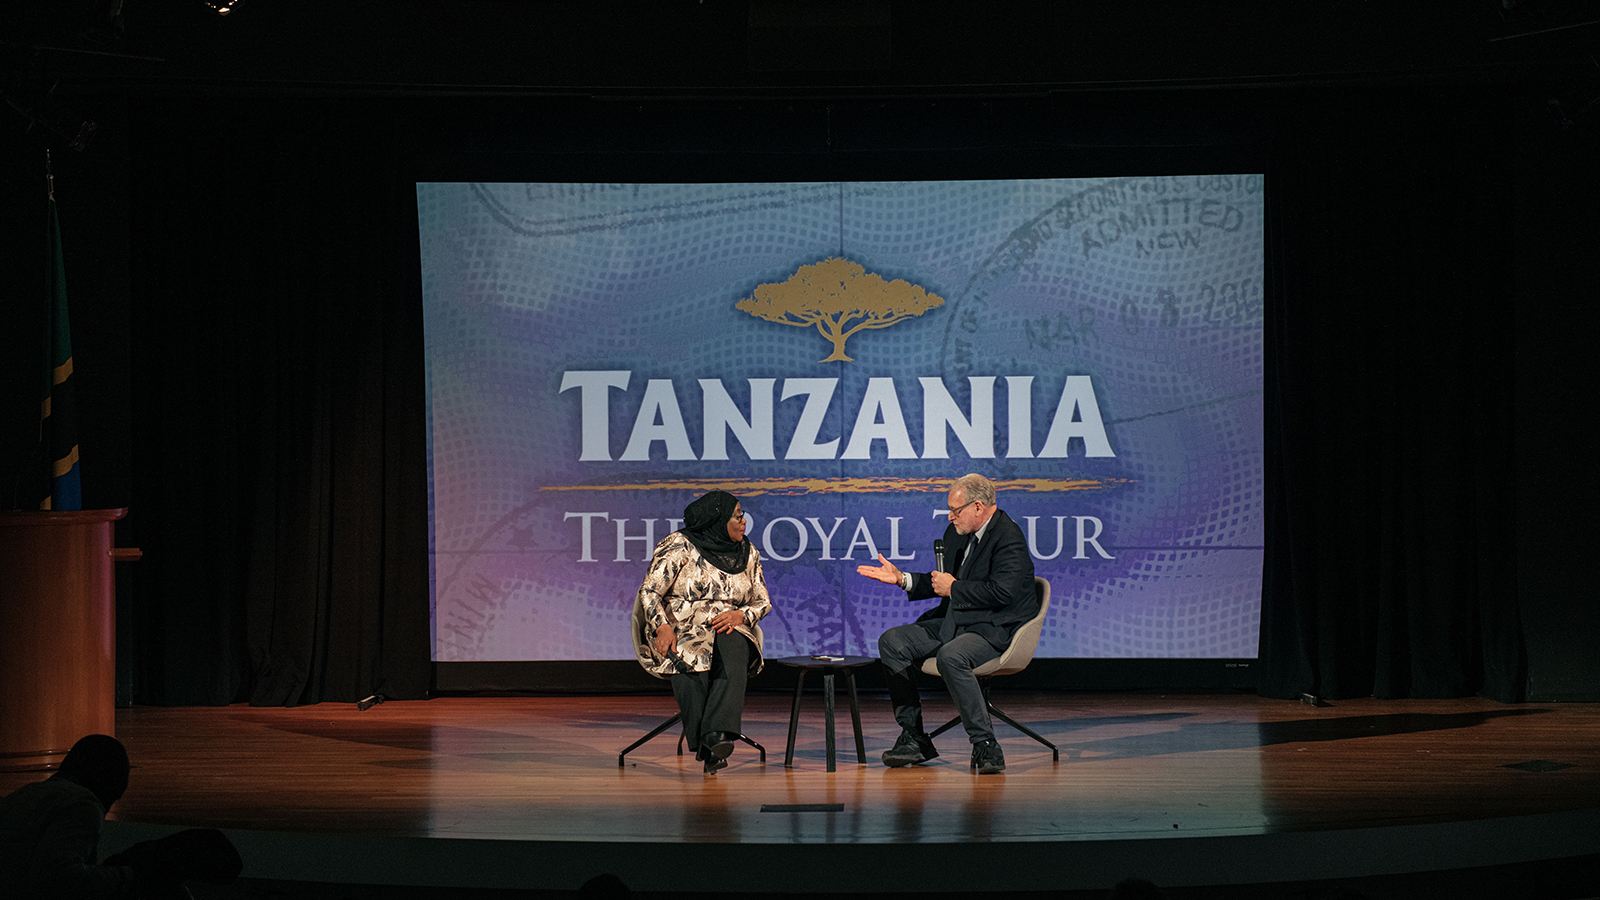 Tanzania The Royal Tour at the Solomon R Guggenheim Museum